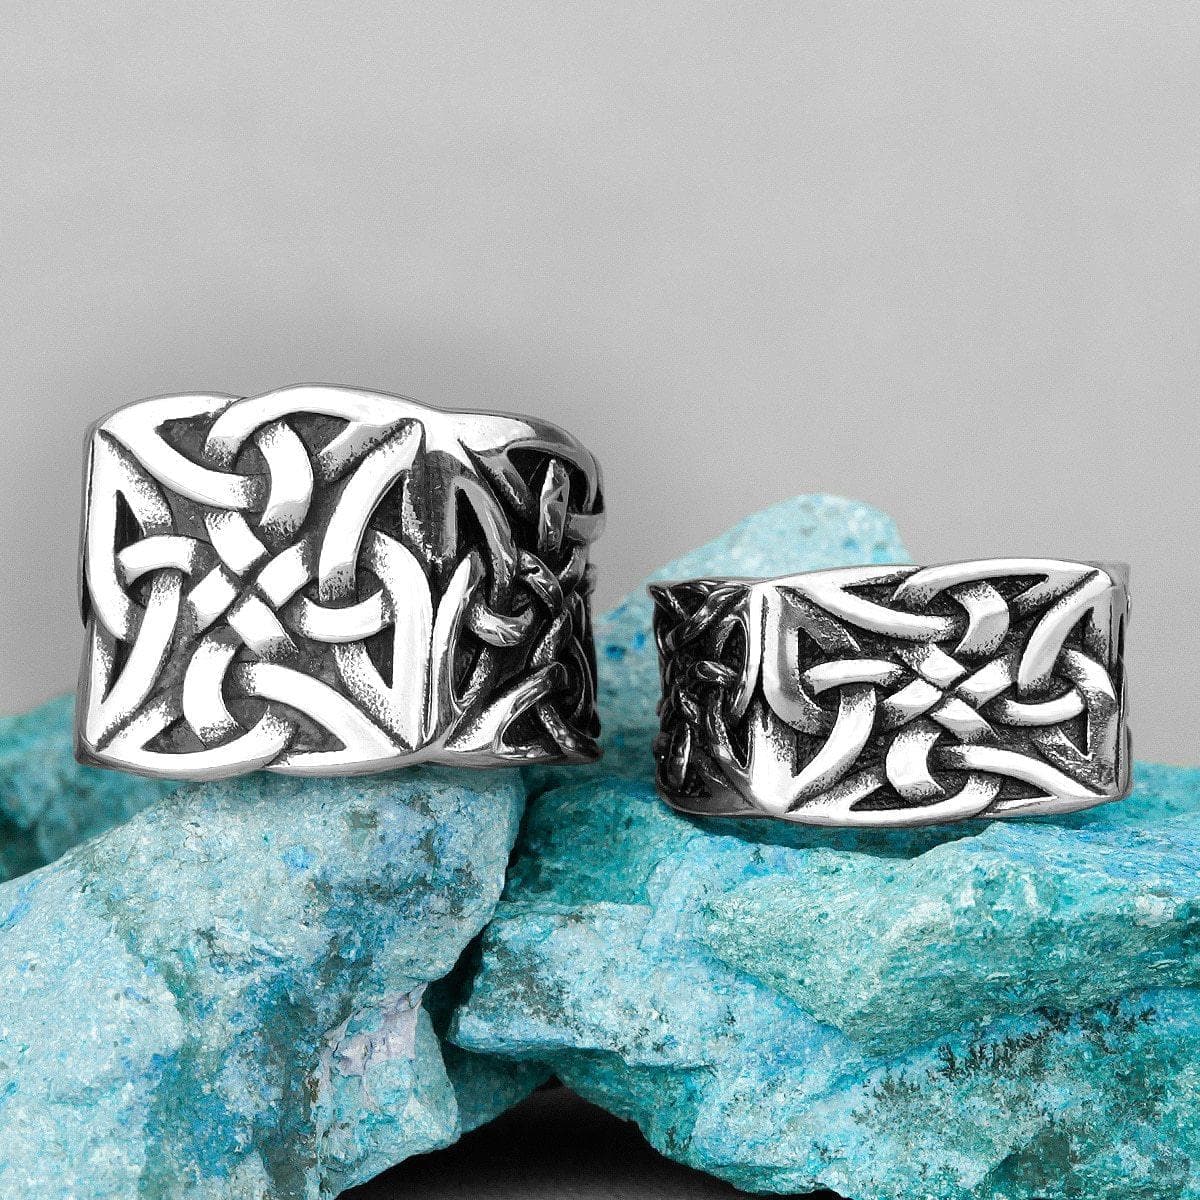 Rings Retro Viking Knot Stainless Steel Mens Rings Punk Simple For Lovers Couple Boyfriend Biker Jewelry Creativity Gift Wholesale|Rings| Ancient Treasures Ancientreasures Viking Odin Thor Mjolnir Celtic Ancient Egypt Norse Norse Mythology